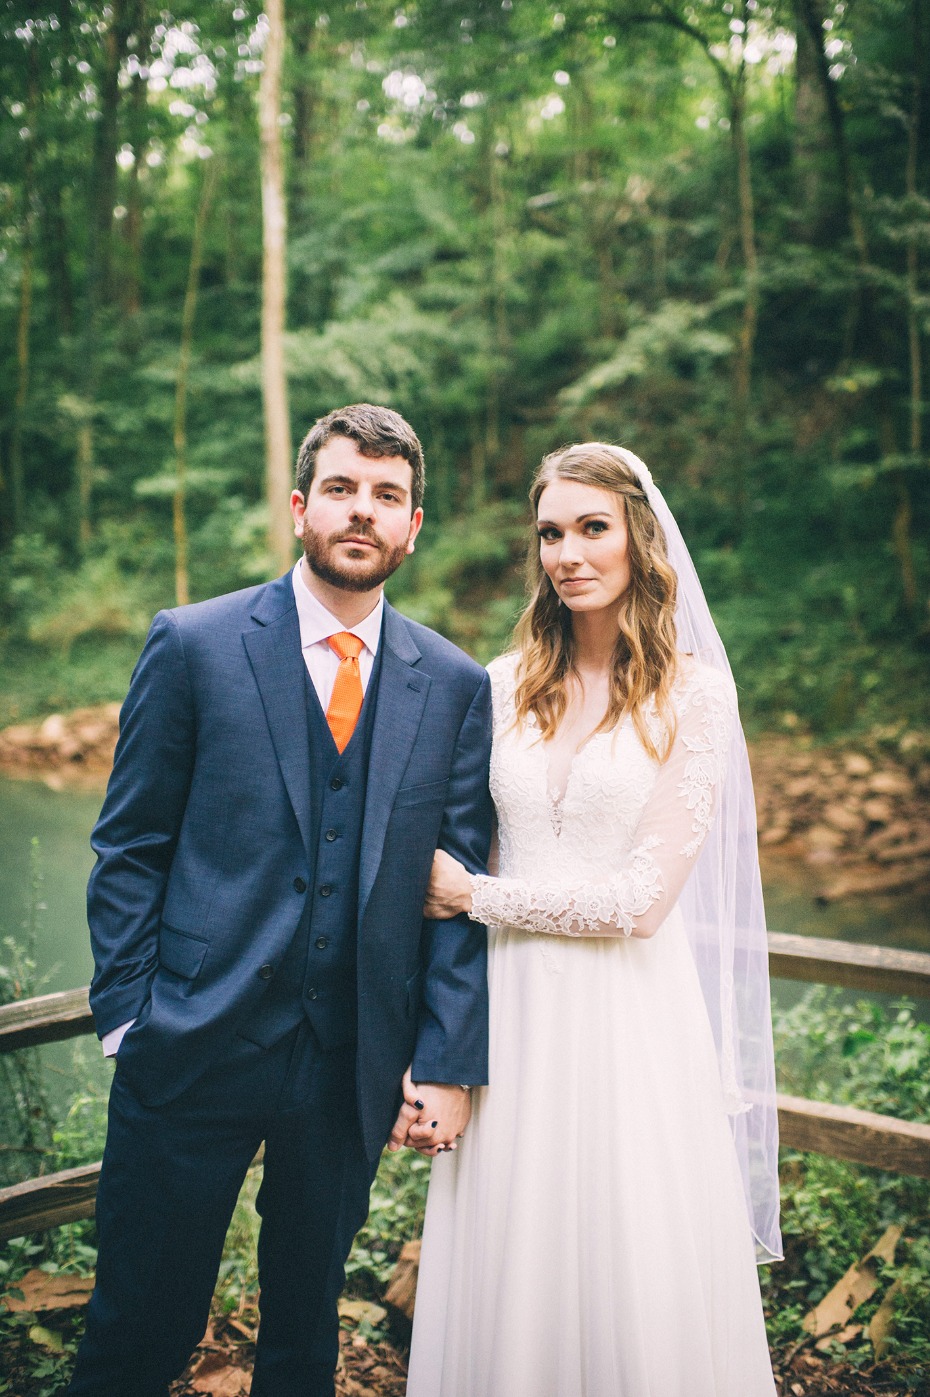 Woodsy outdoor wedding at The Lost River Cave